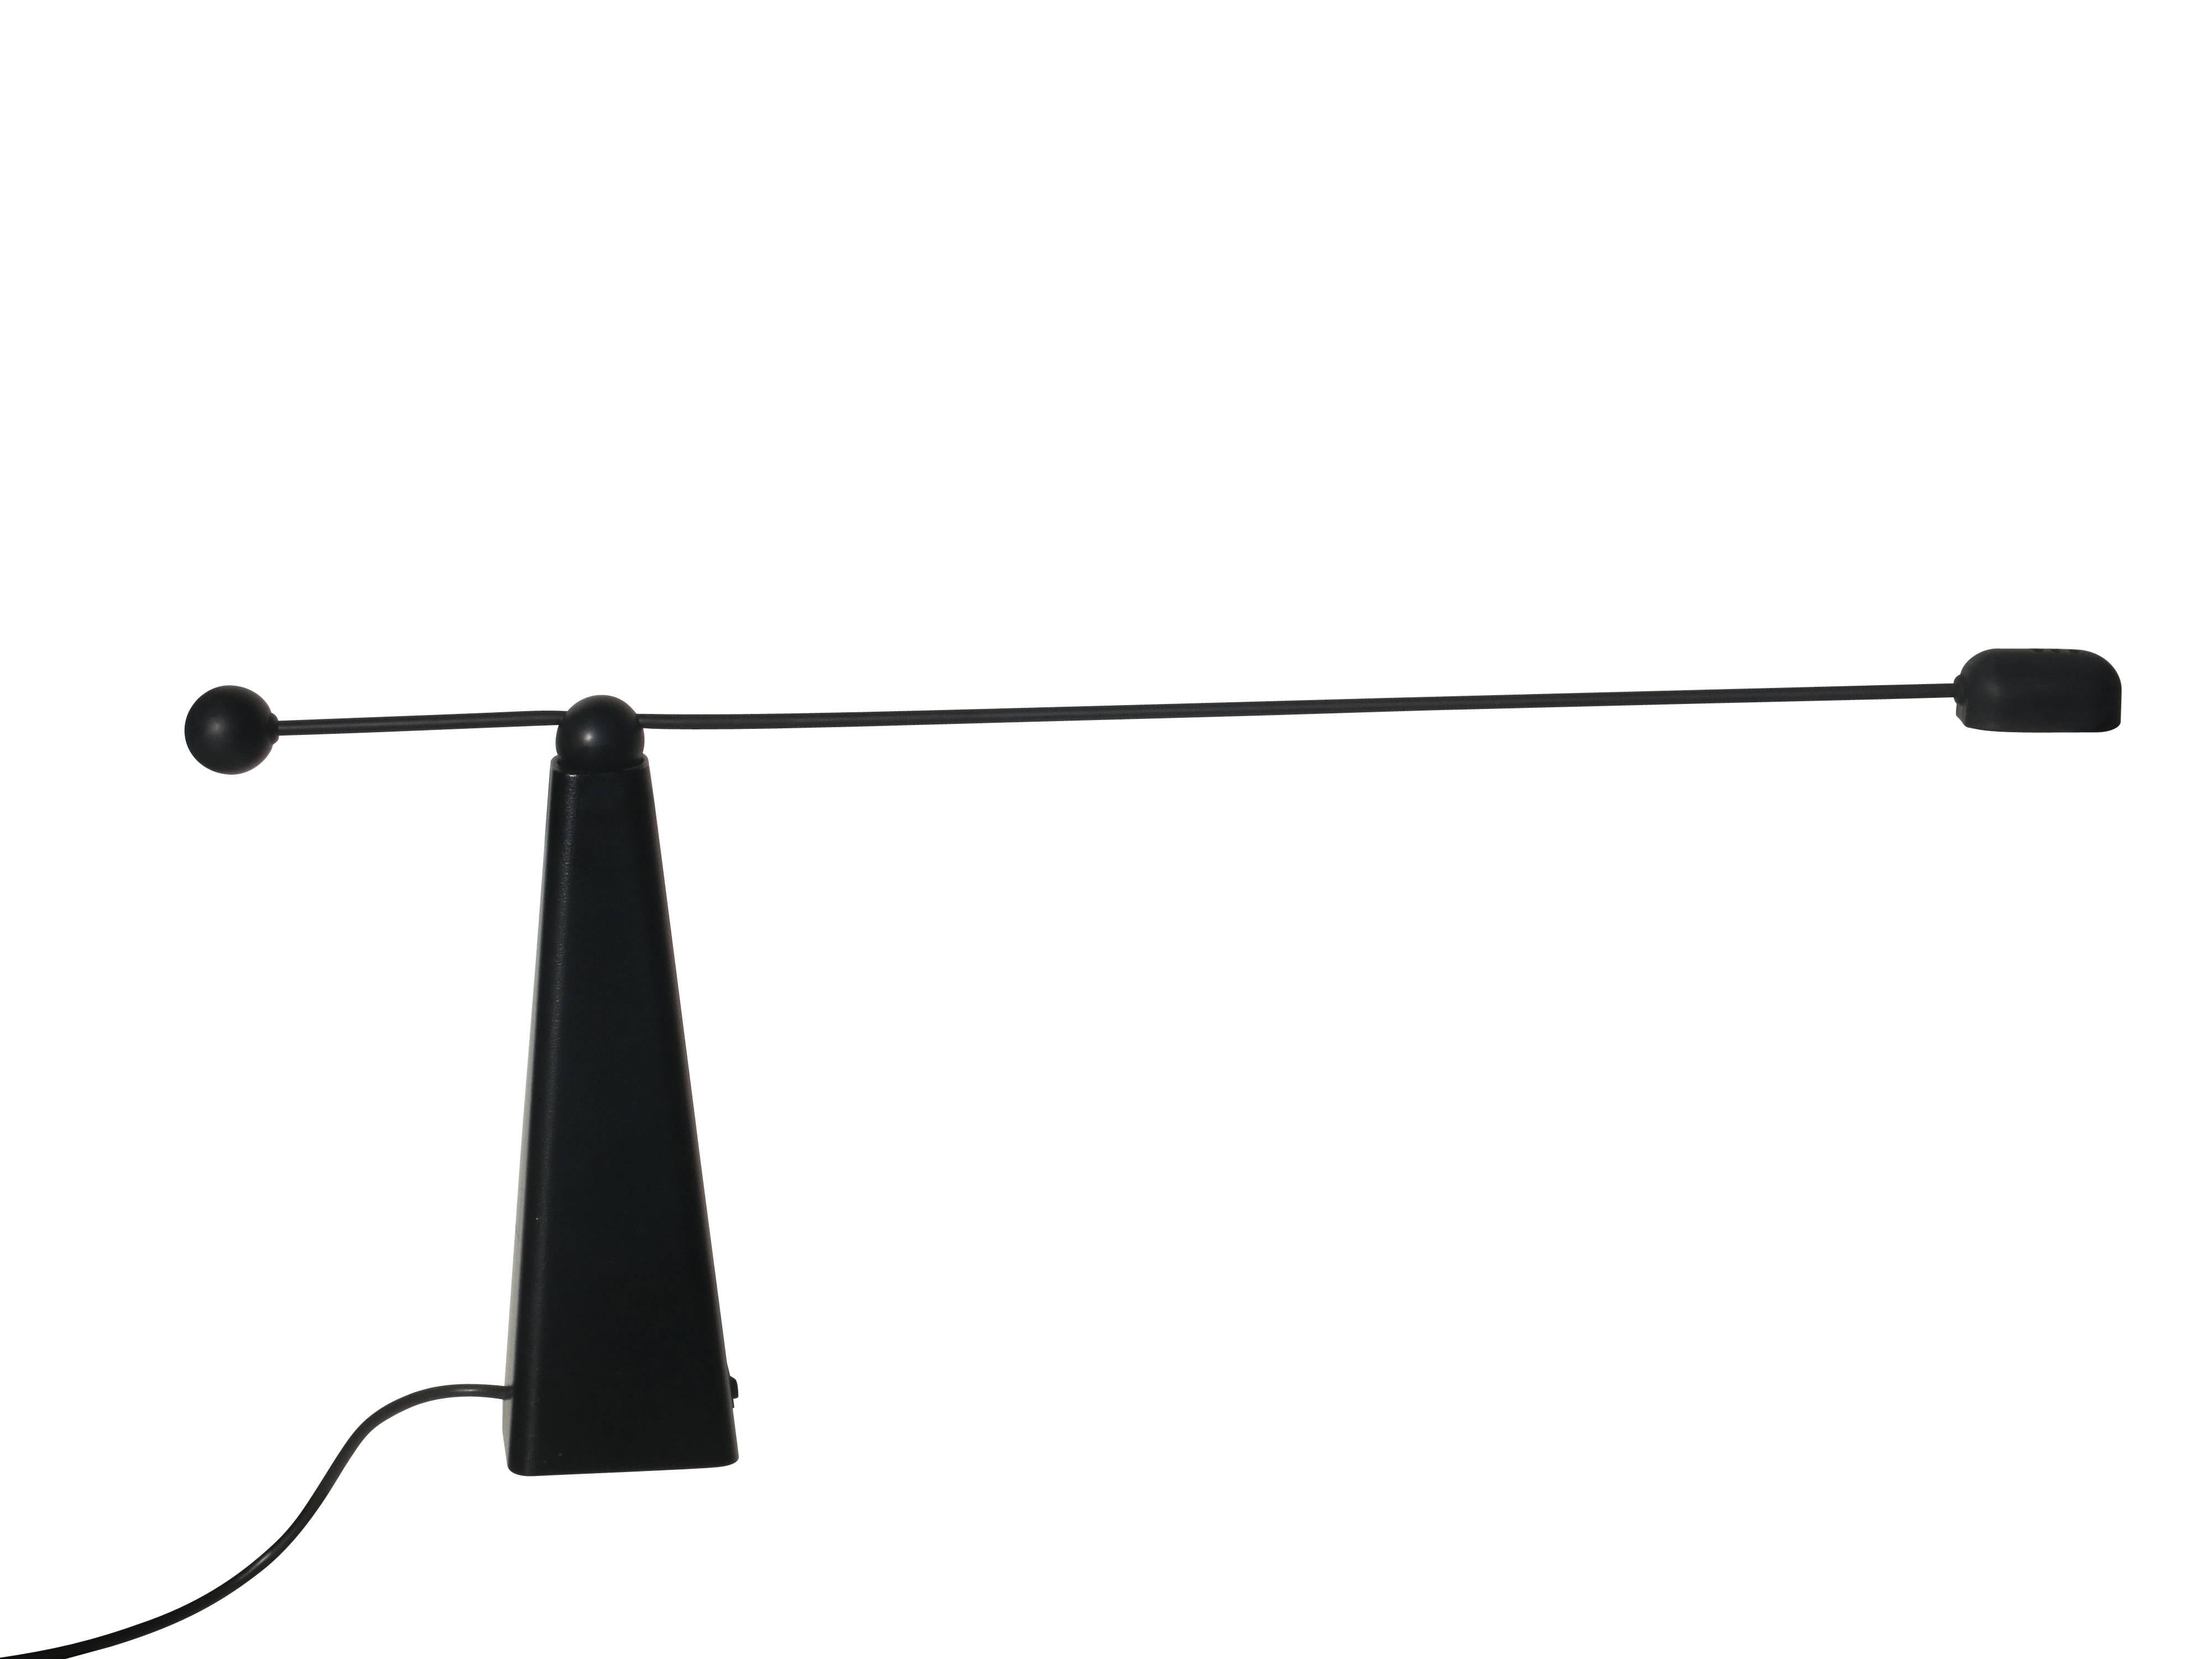 Stylish and sleek all black lamp designed by Ron Rezek. The arm manipulates side to side and up and down for task lighting or spotlighting of objects. The rocker switch has a high/low intensity option. The fixture takes a 12 volt, 50 watt bulb.